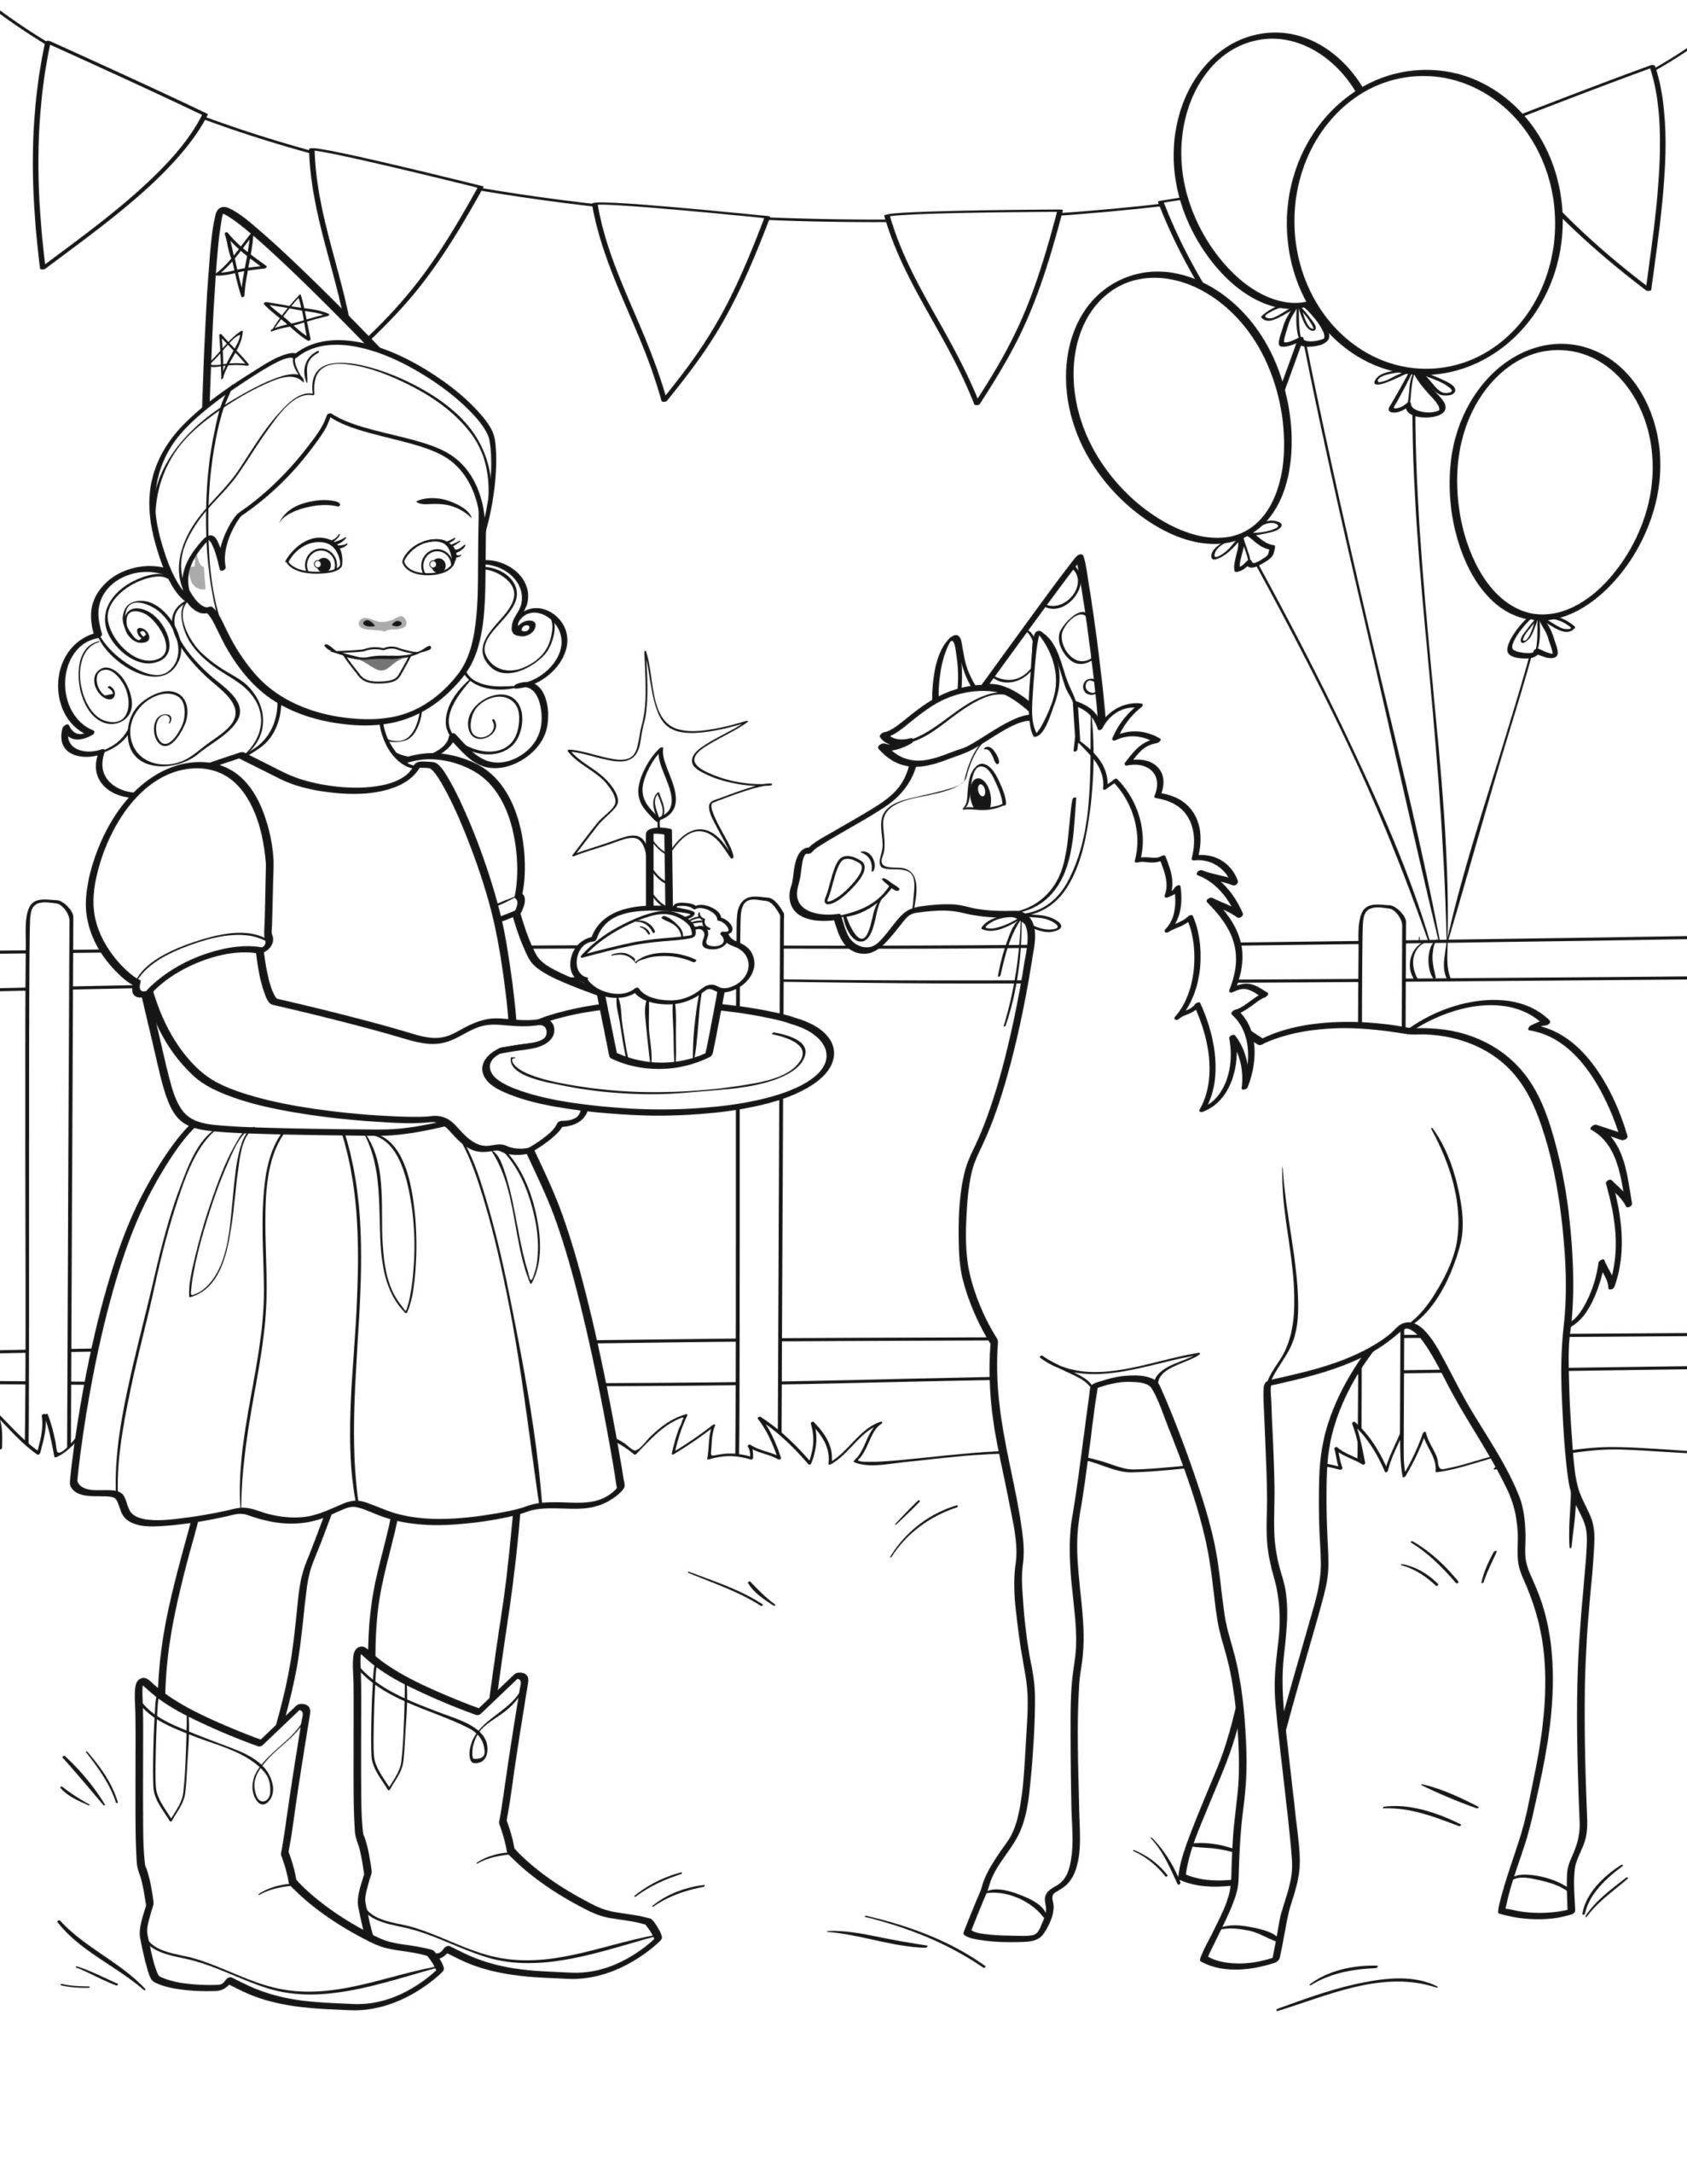 https://ourgeneration.com/wp-content/uploads/OurGeneration_ColoringSheet_Birthday-scaled.jpg